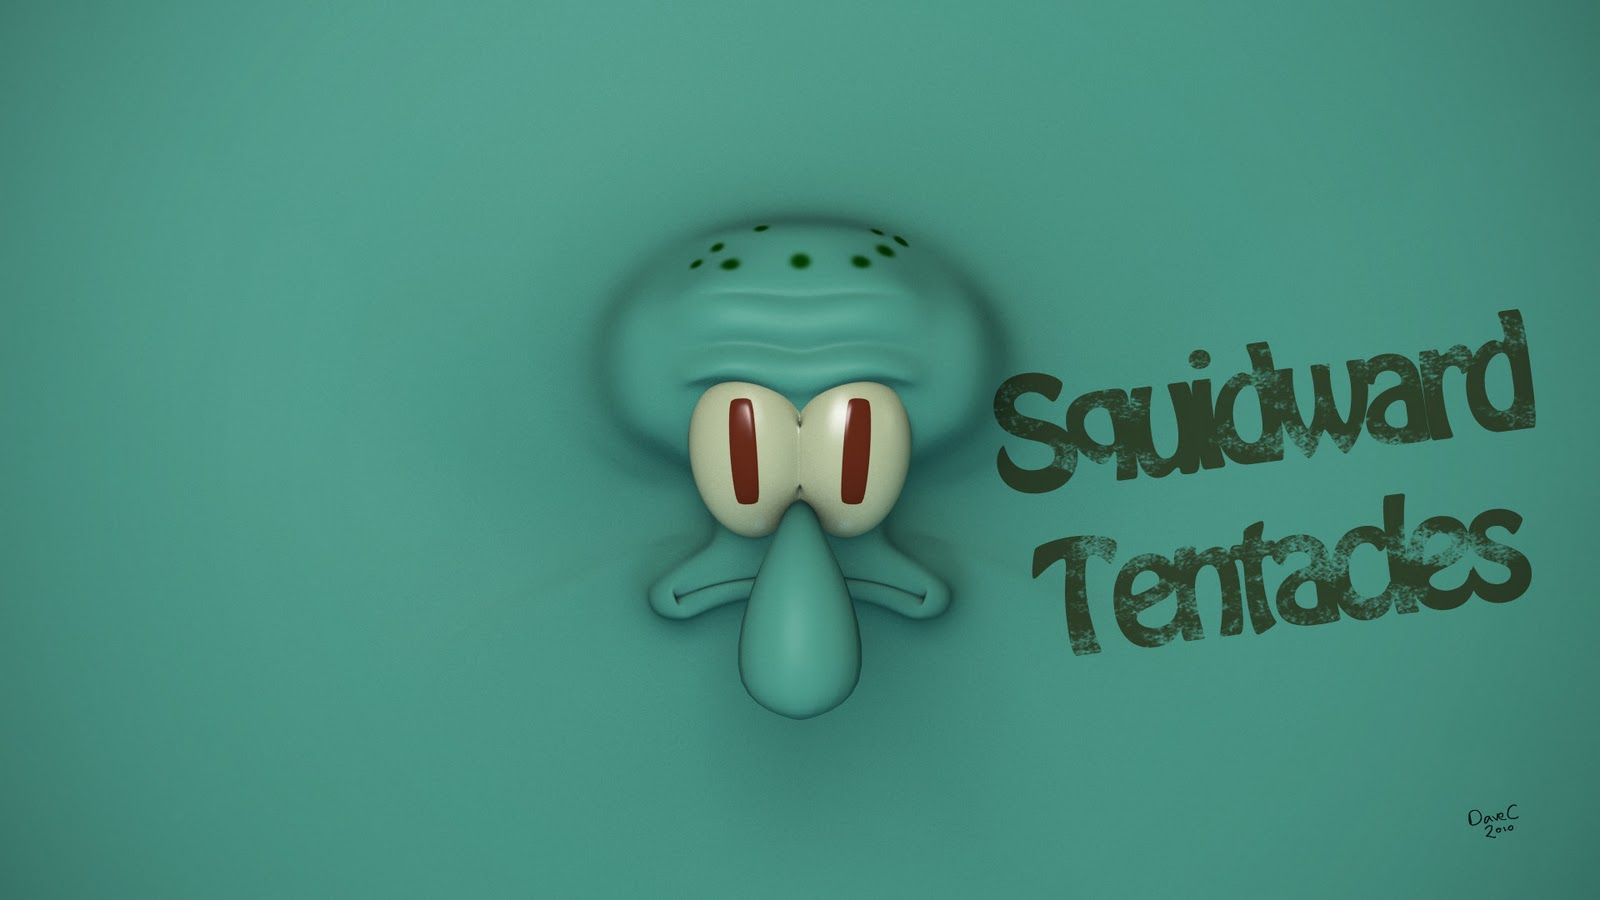 1920x1200 wallpaper, background, squidward, the, tentacles, spongebob, squarepants, wallpaper, background, wallpaper, background, squidward, the, tentacles, spongebob, squarepants - Squidward